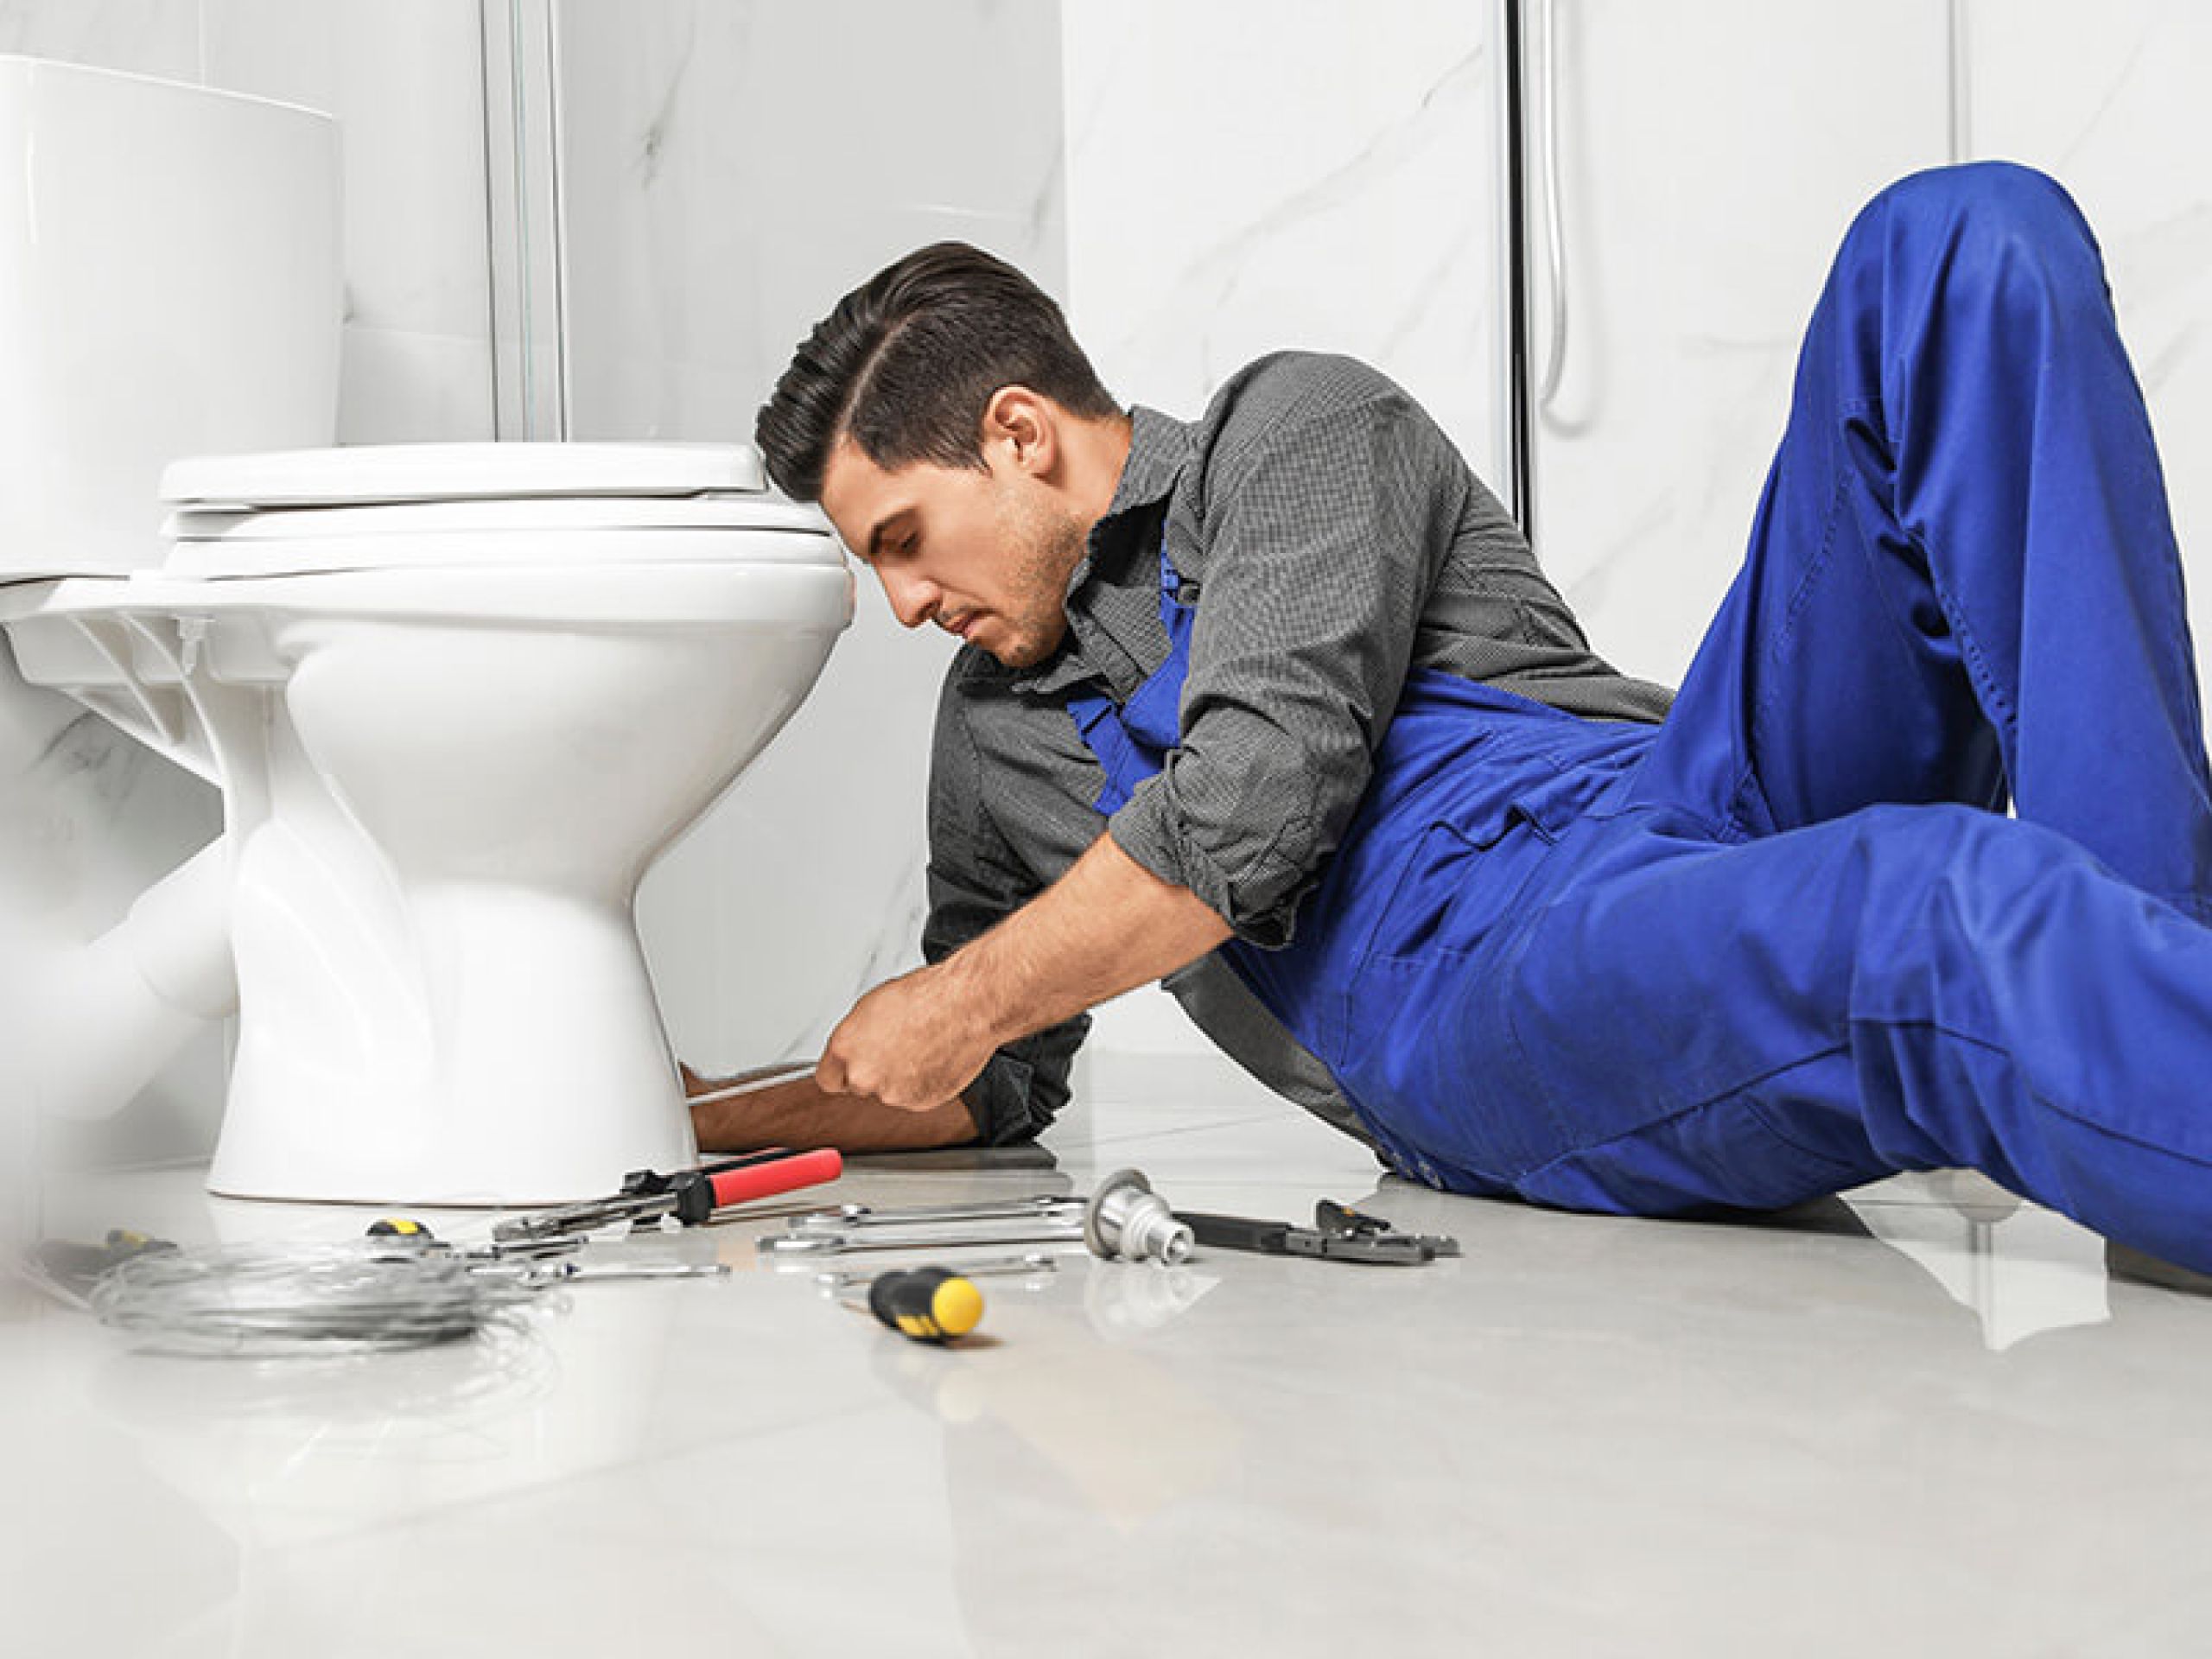 Man laying on bathroom floor replacing a clogged toilet